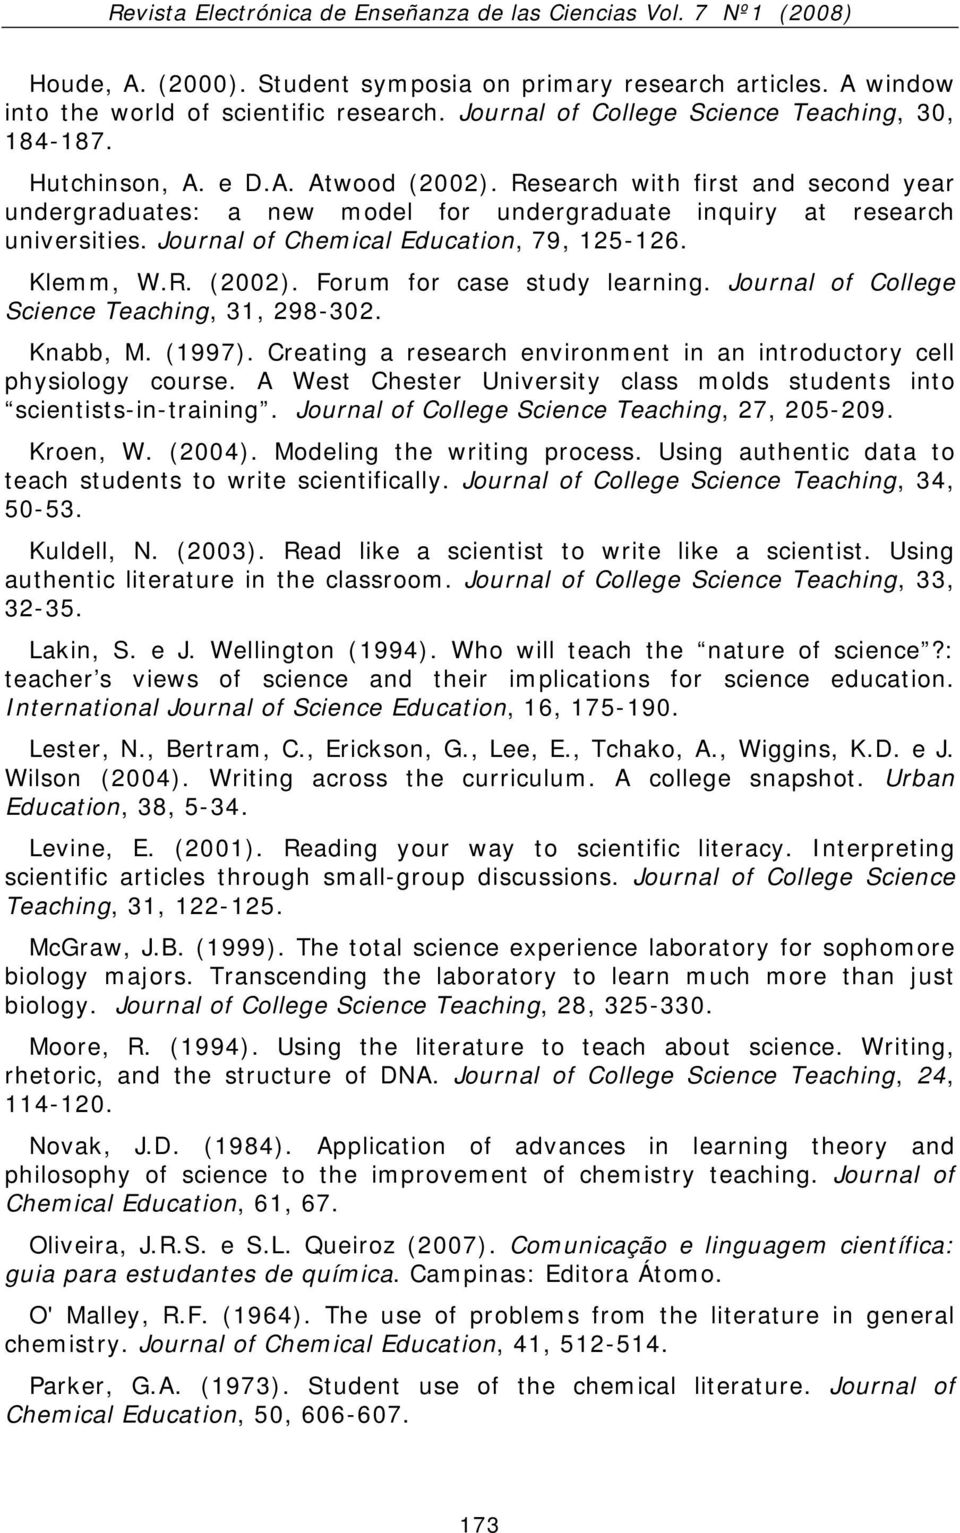 Forum for case study learning. Journal of College Science Teaching, 31, 298-302. Knabb, M. (1997). Creating a research environment in an introductory cell physiology course.